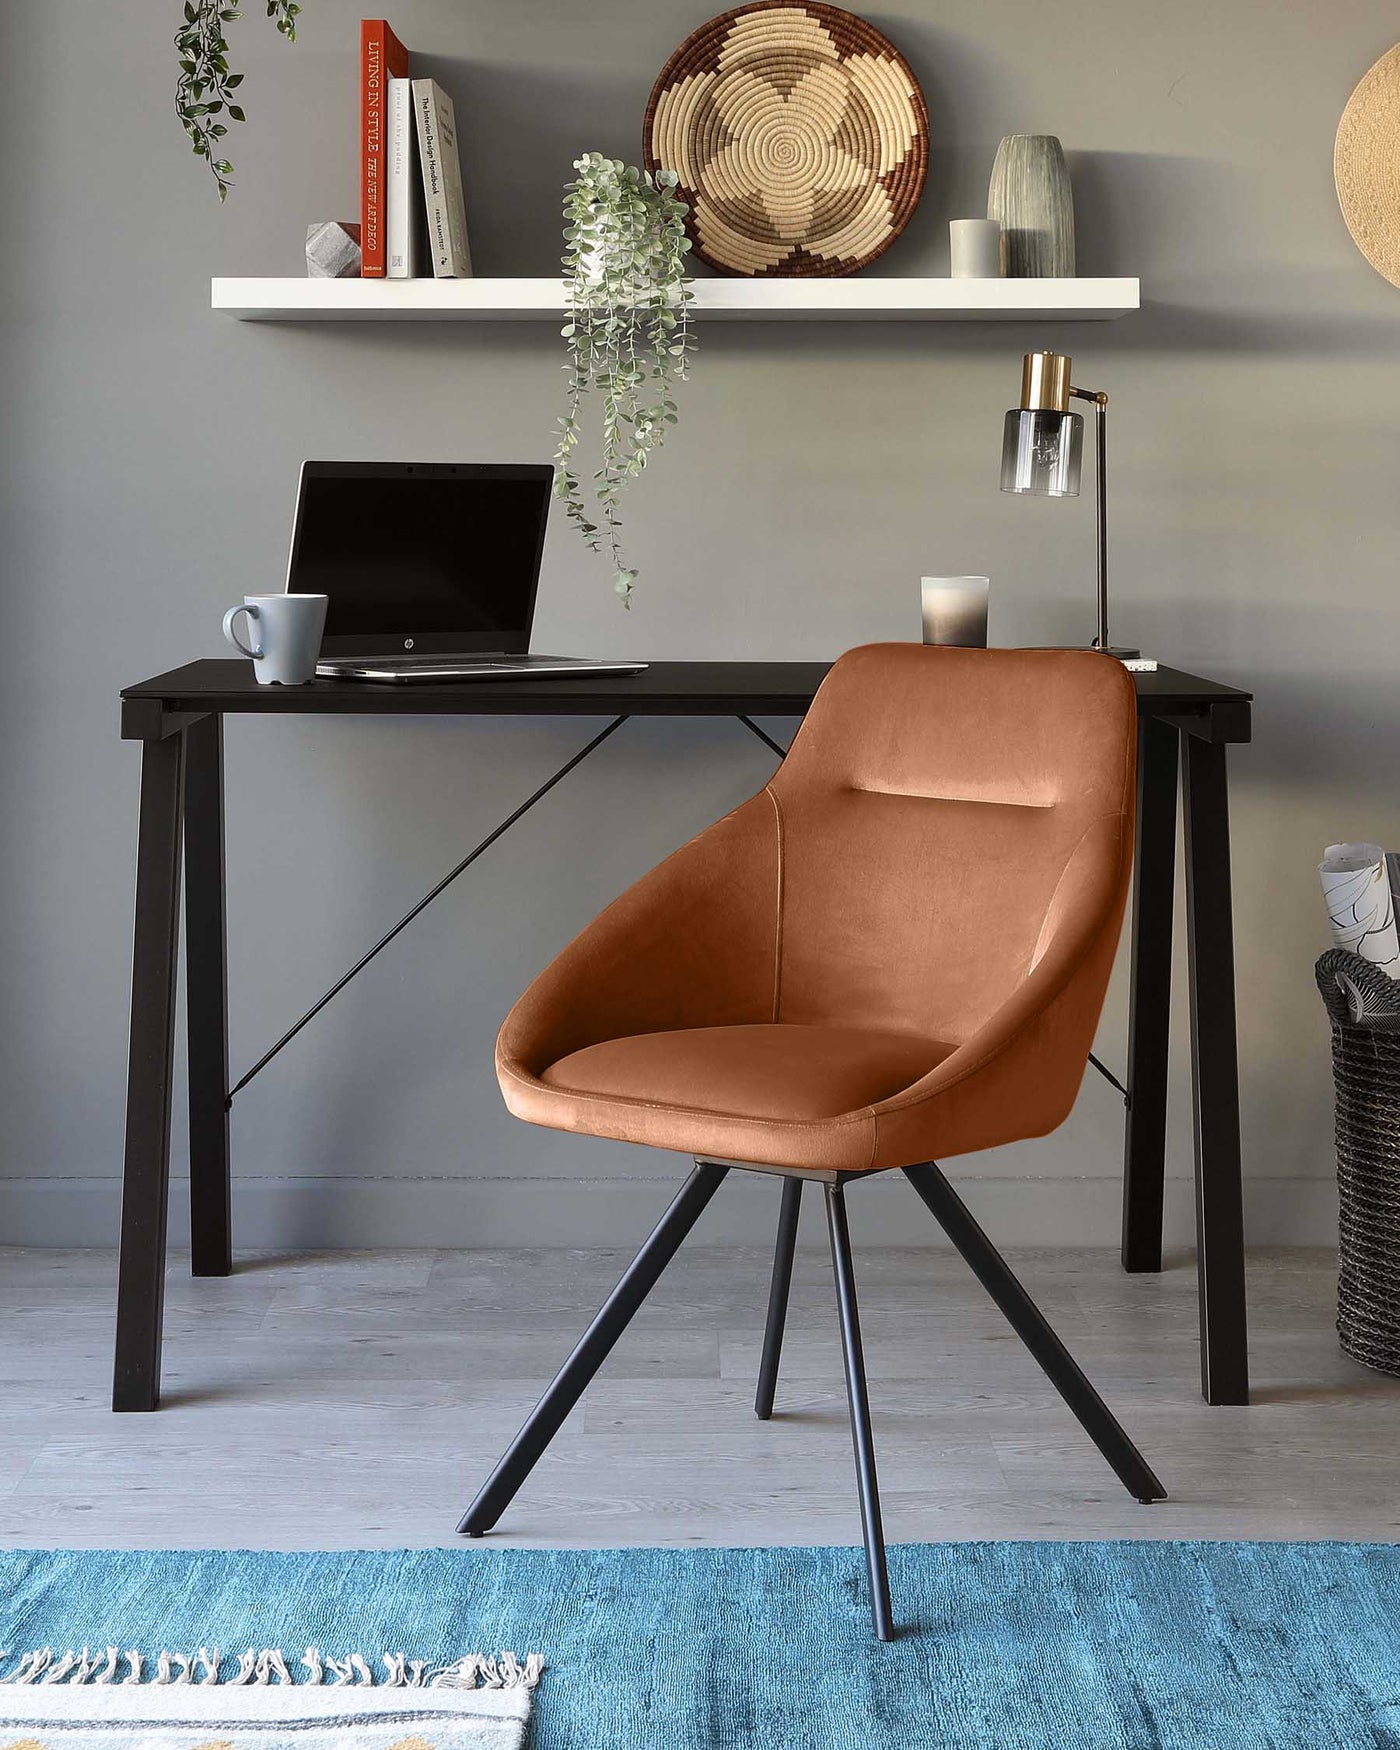 Modern minimalist black work desk paired with a stylish caramel brown upholstered chair with black metal legs, situated in an elegantly decorated room setting.